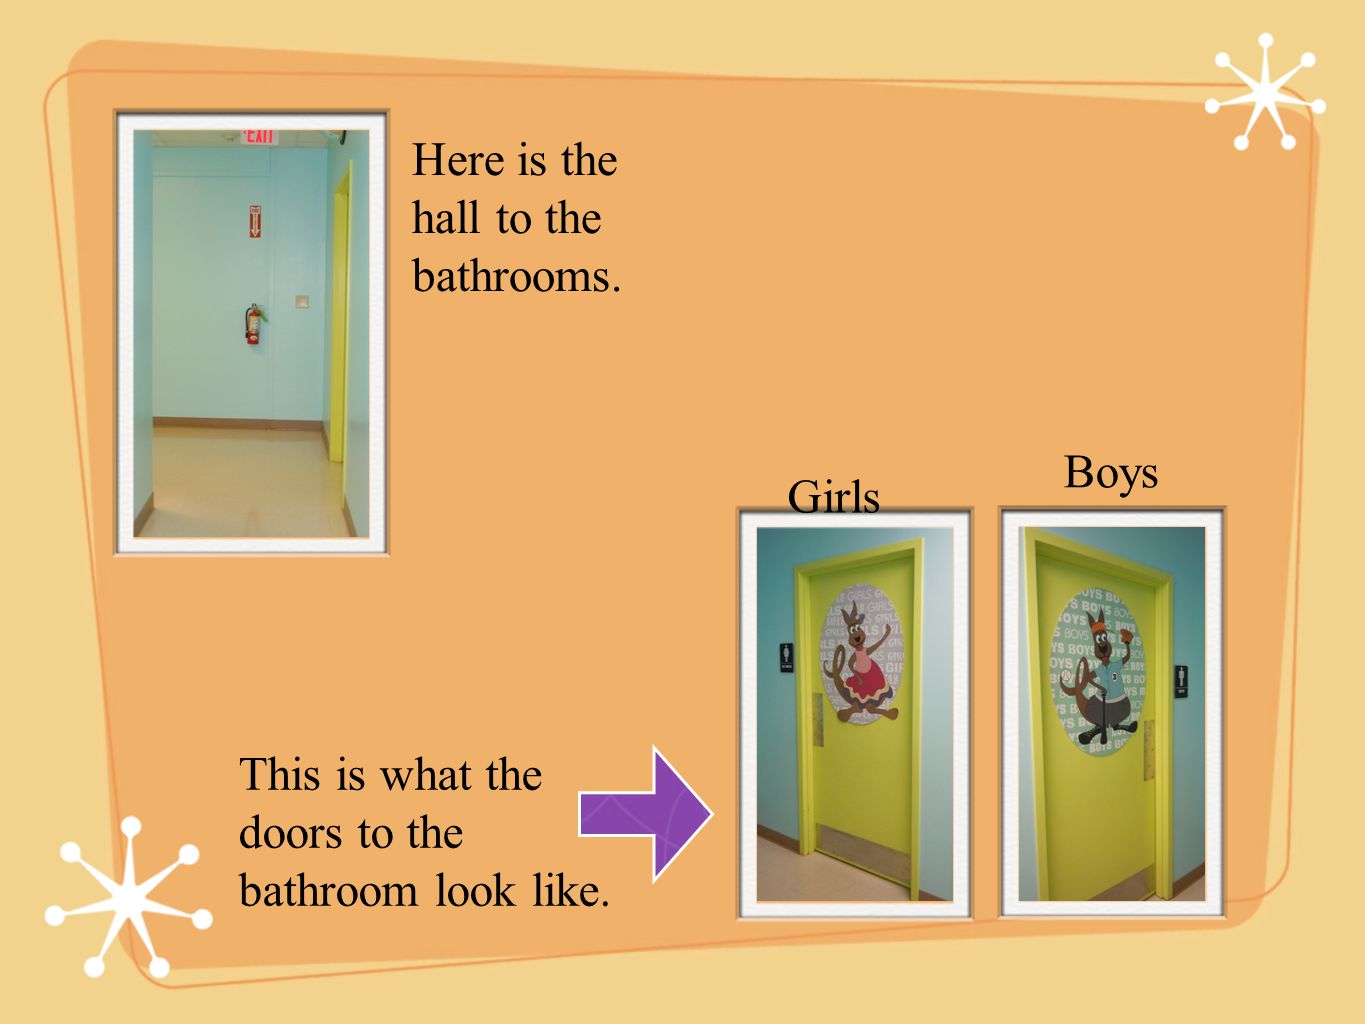 Here is the hall to the bathrooms. This is what the doors to the bathroom look like. Boys Girls